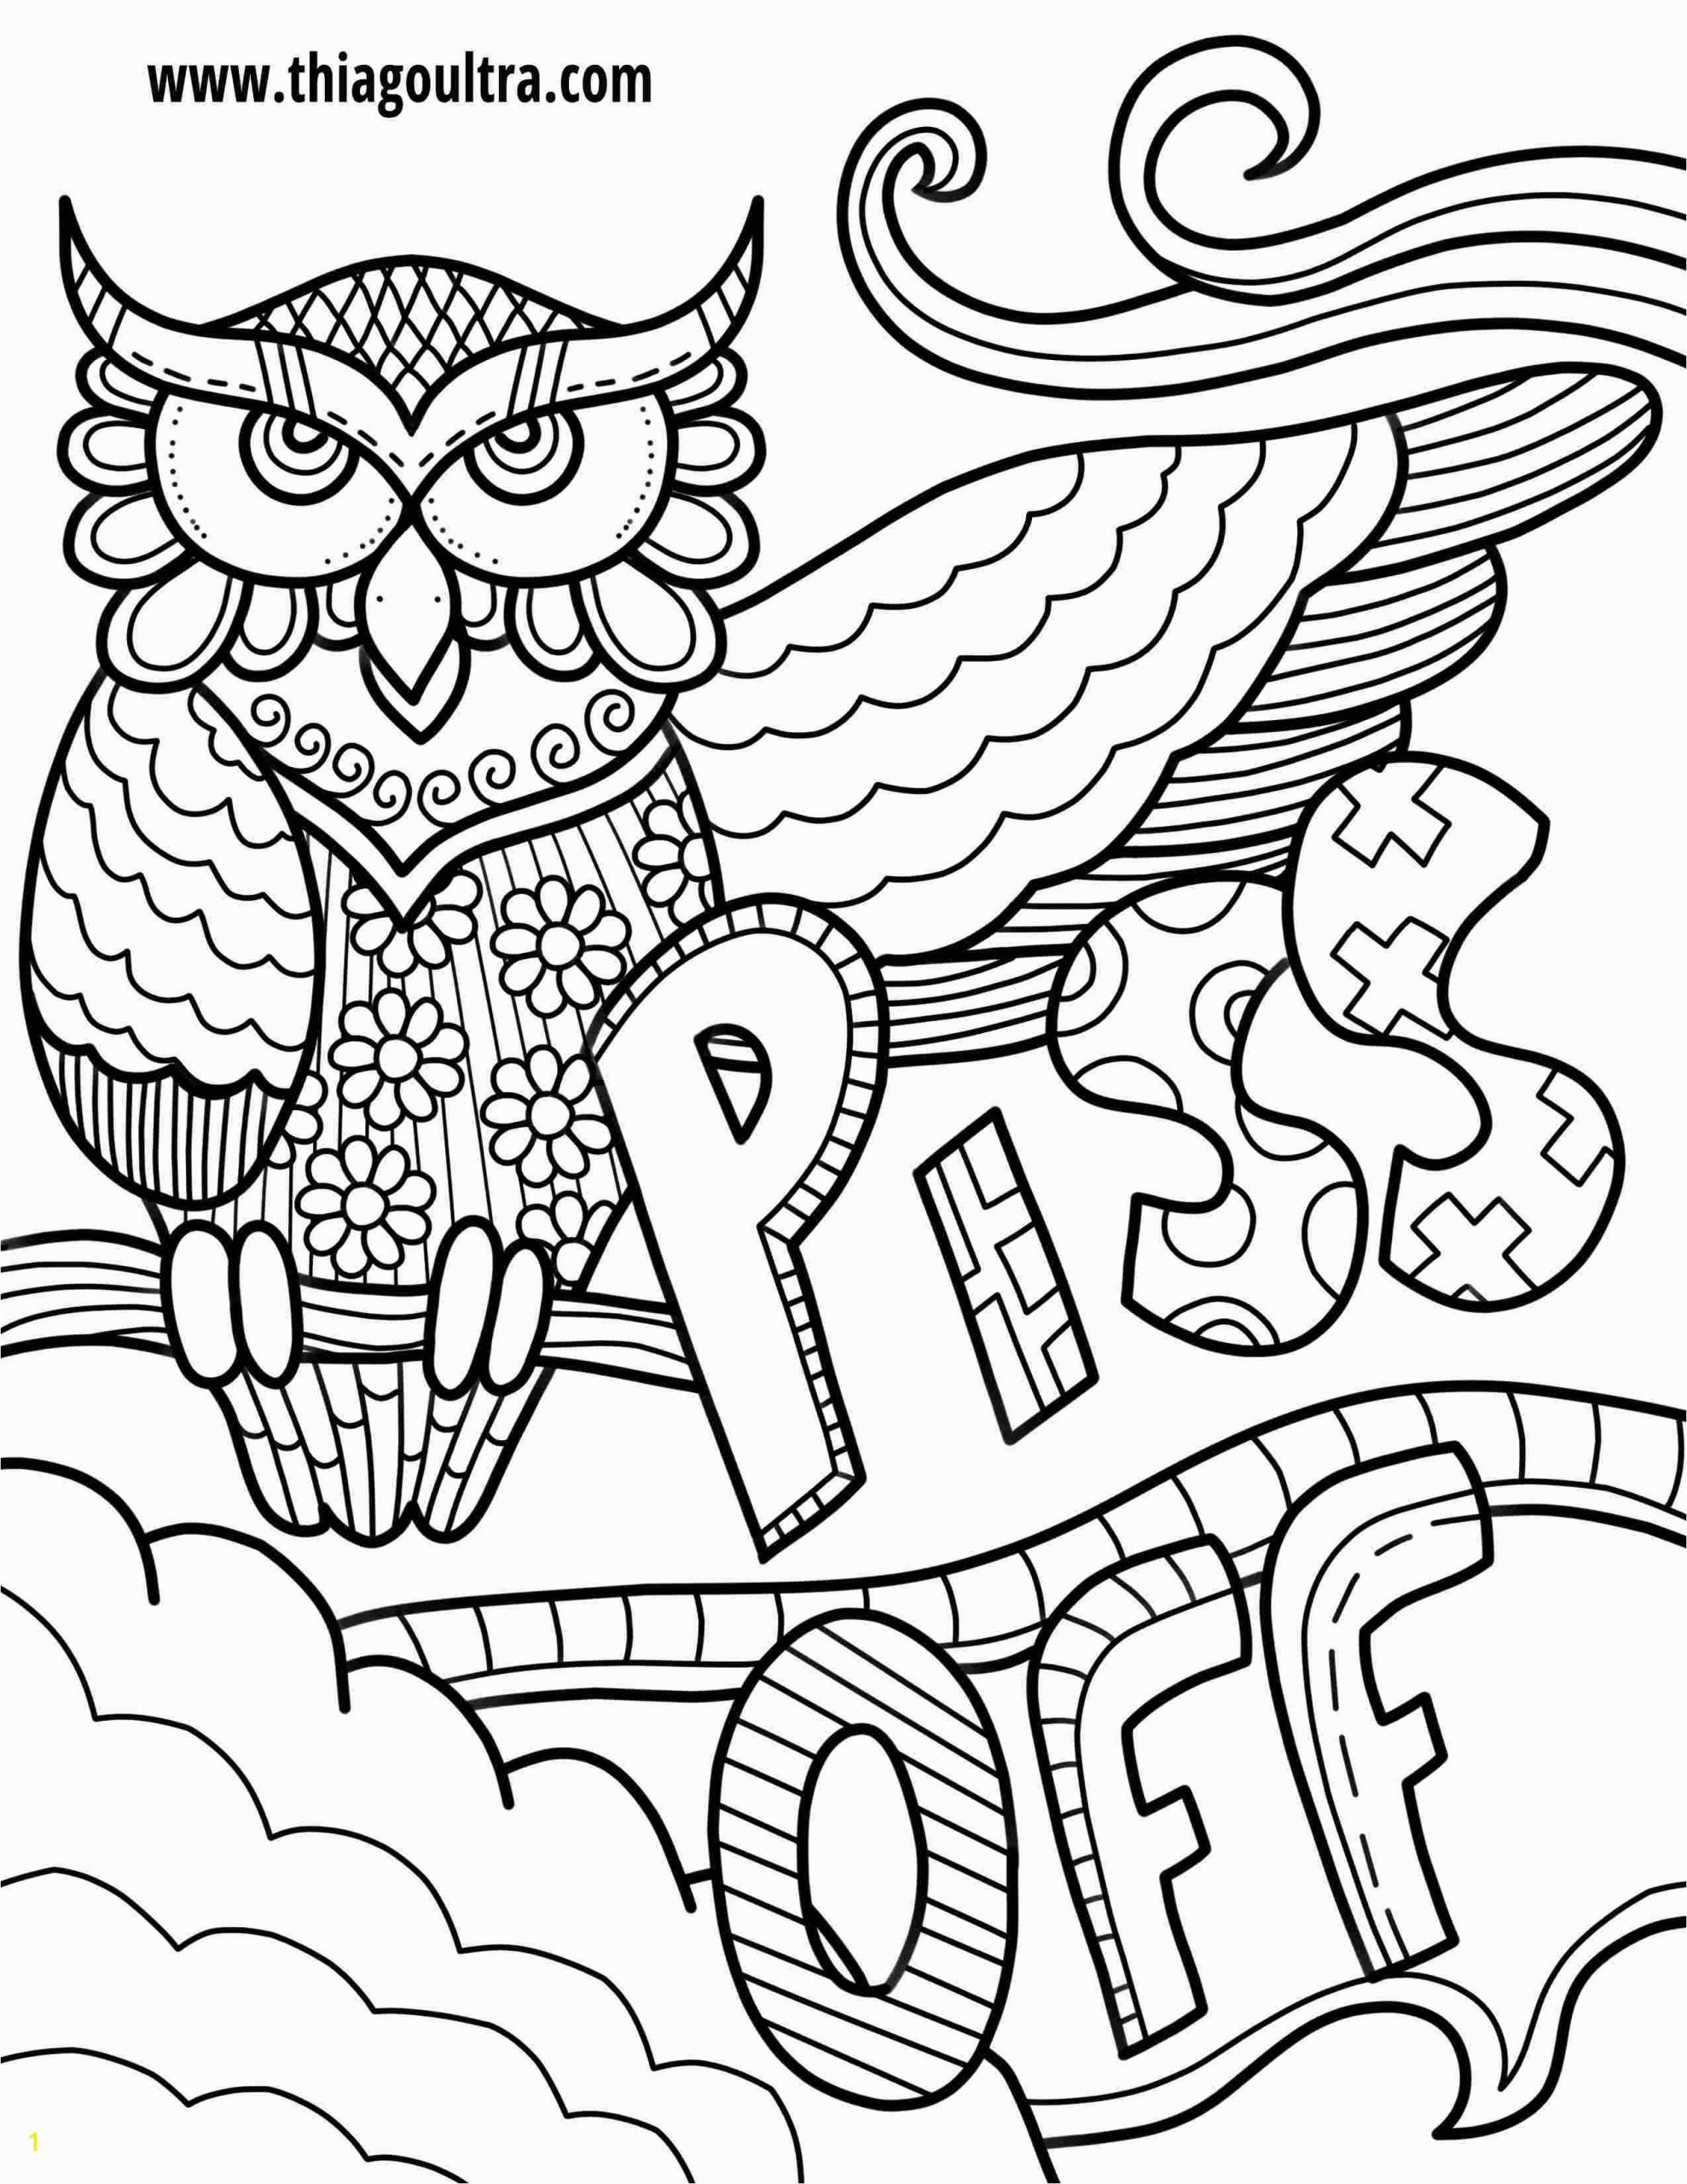  Free Printable Coloring Pages For Adults Only Swear Words Pdf Divyajanan